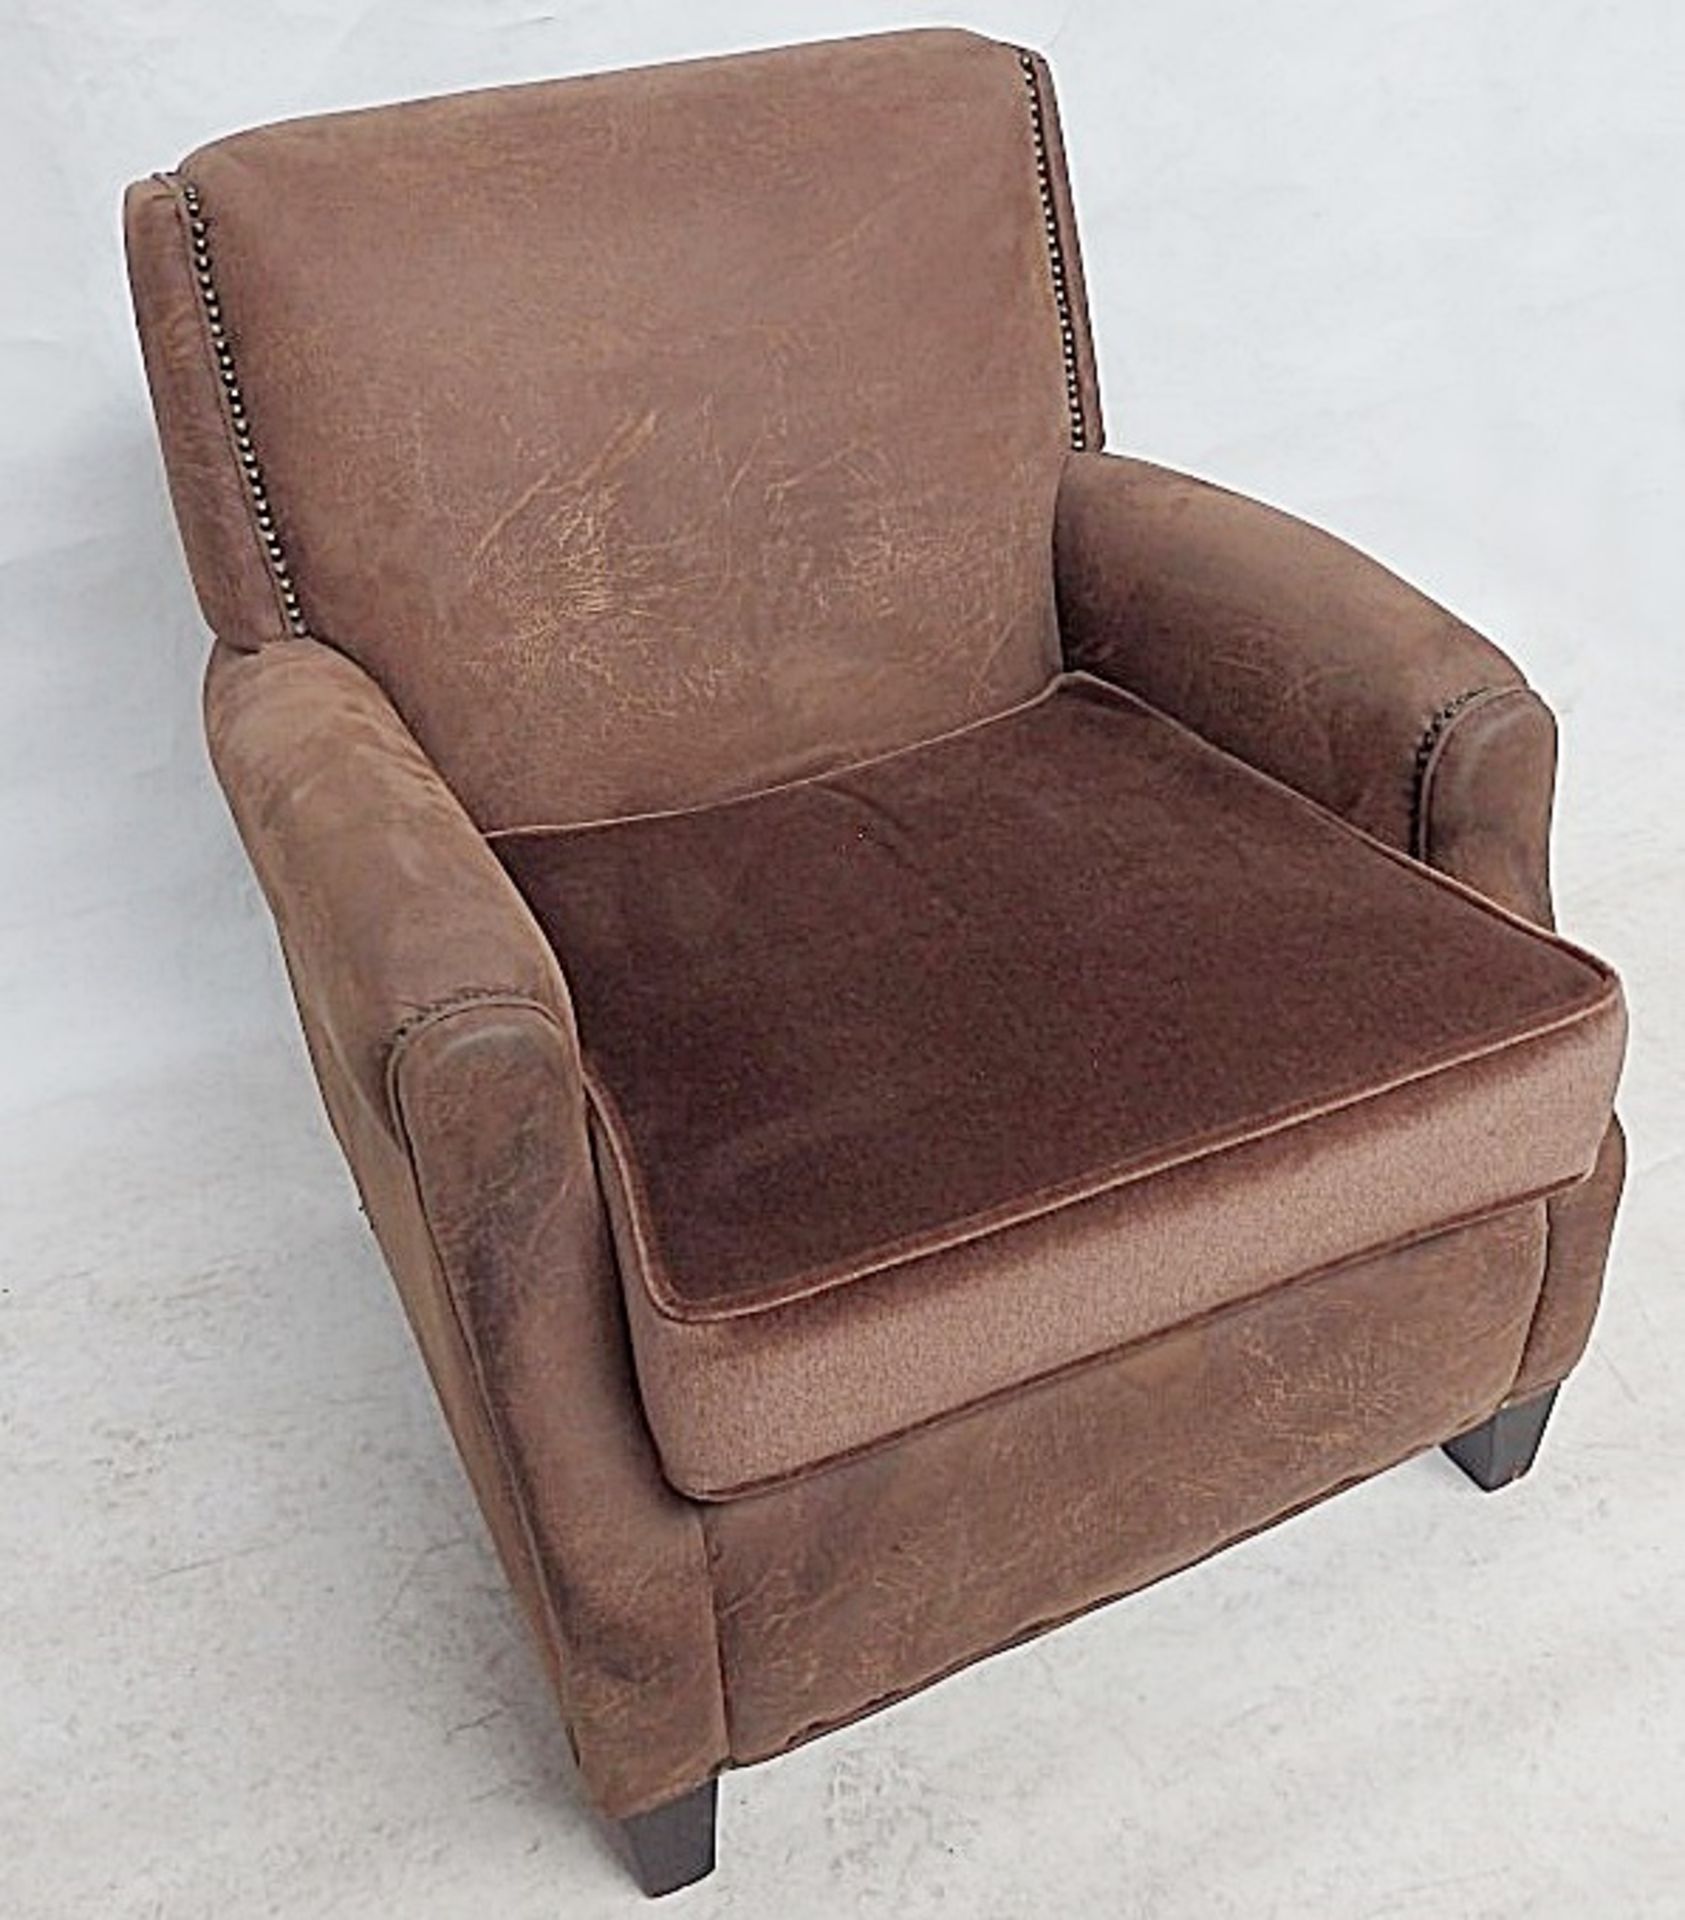 1 x Bespoke Brown Leather & Chenille Armchair - Expertly Built And Upholstered By British